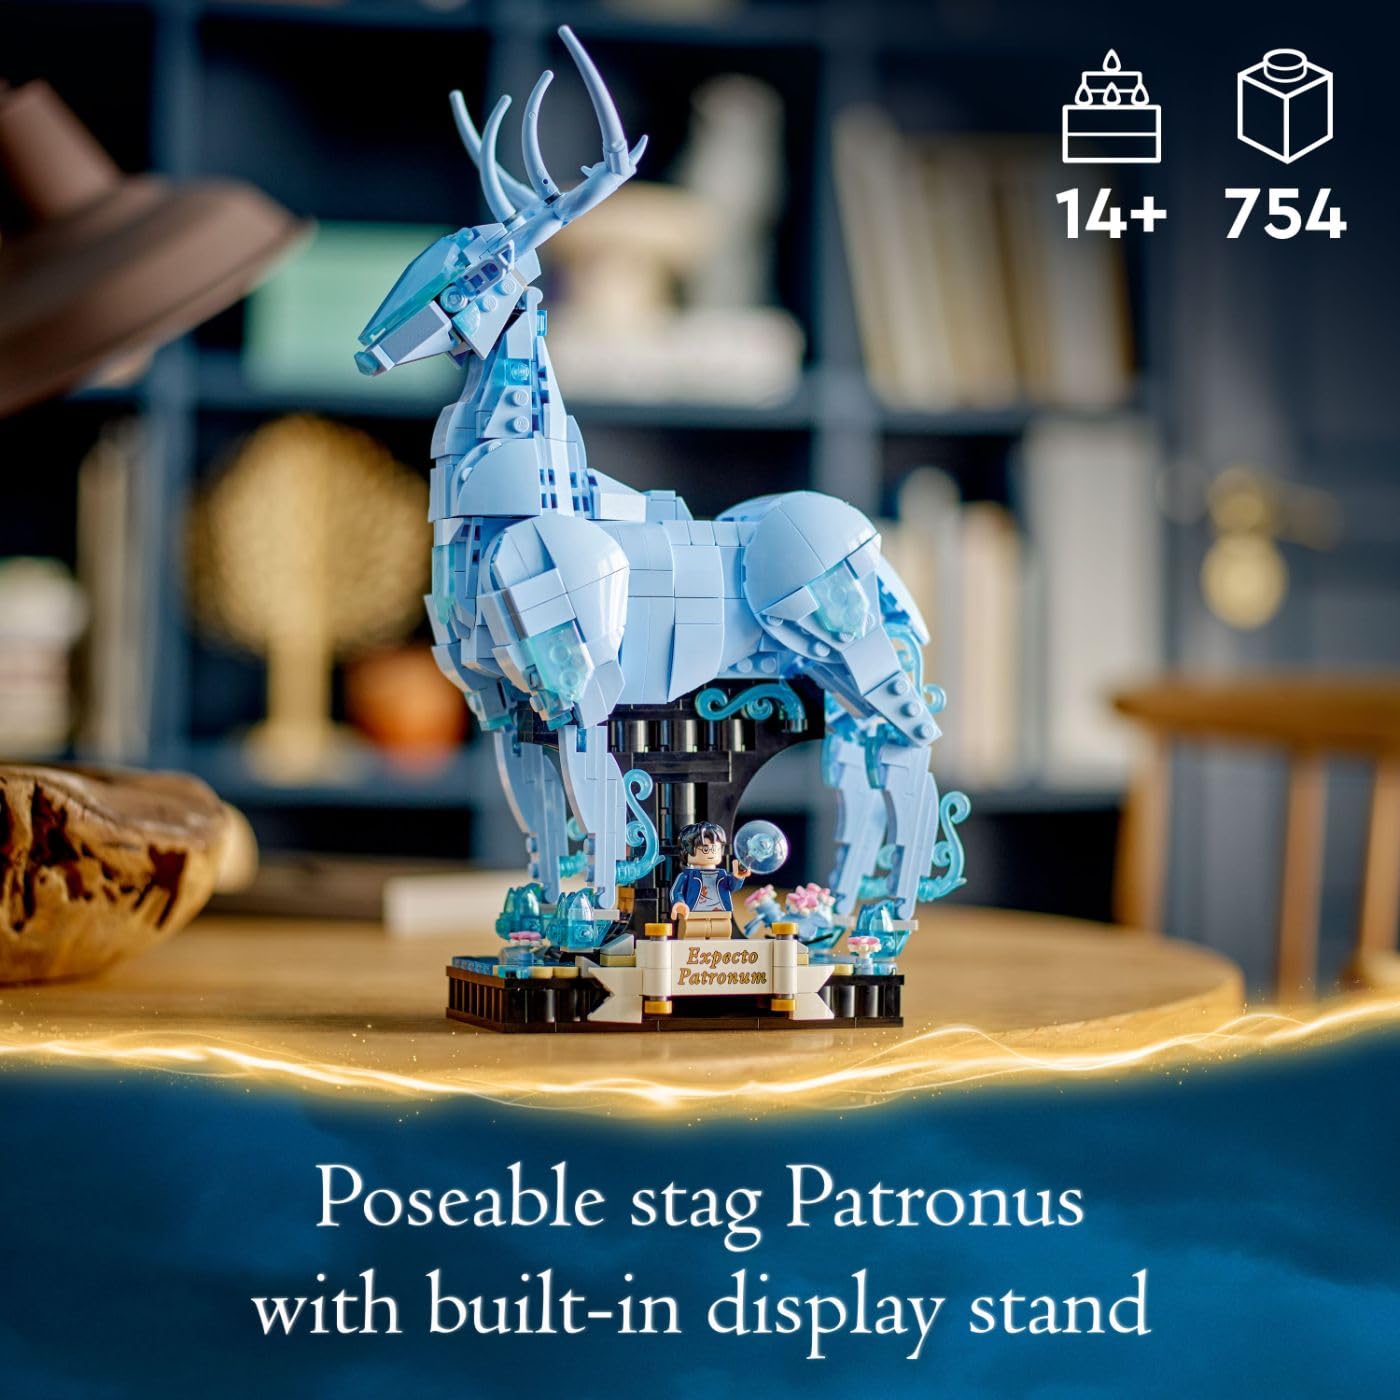 LEGO Harry Potter Expecto Patronum 76414 Collectible 2-in-1 Building Set; Birthday Gift Idea for Teens or Fans Aged 14 and Up; Build and Display Patronus Set for Fans of The Wizarding World